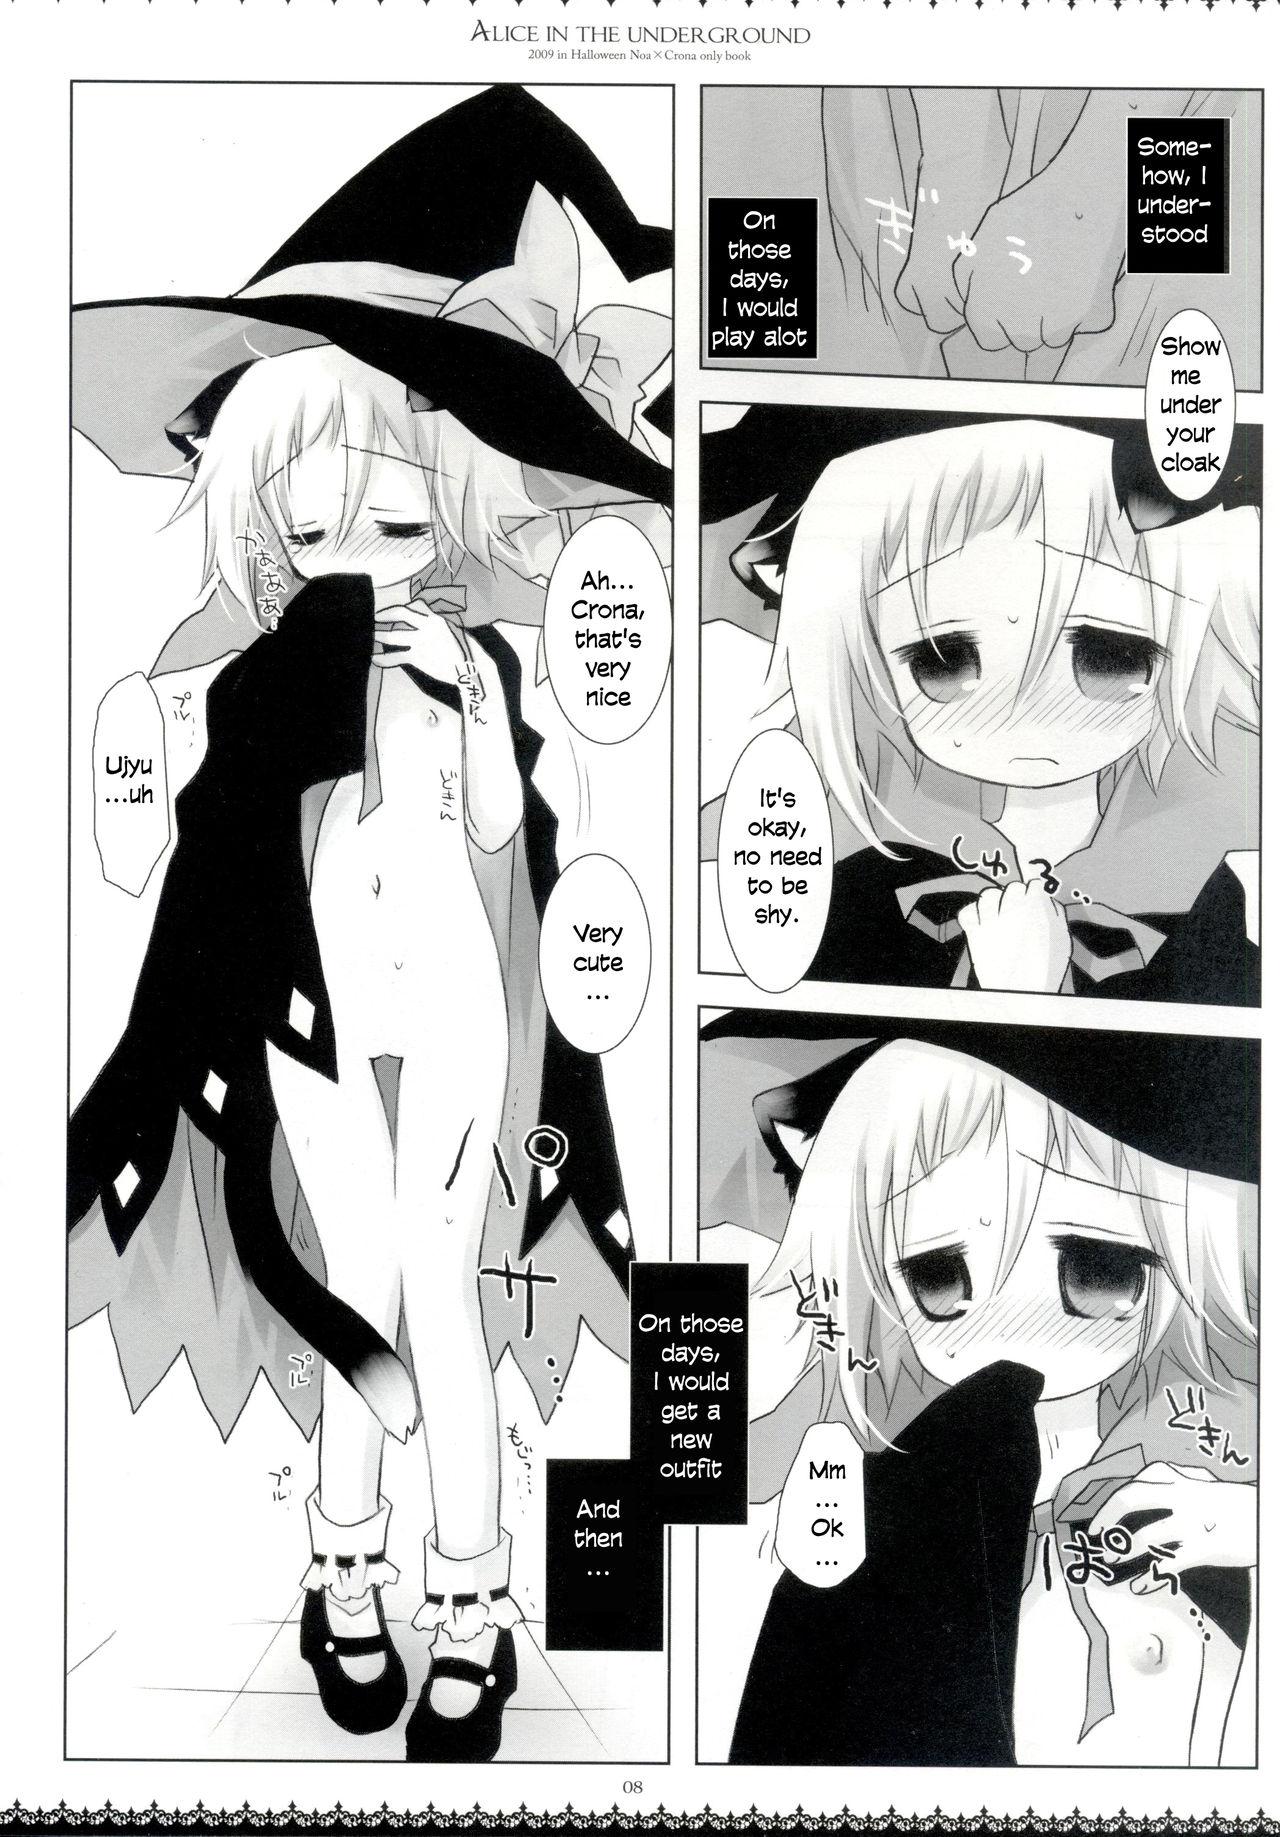 Short Alice in the underground - Soul eater Mofos - Page 7